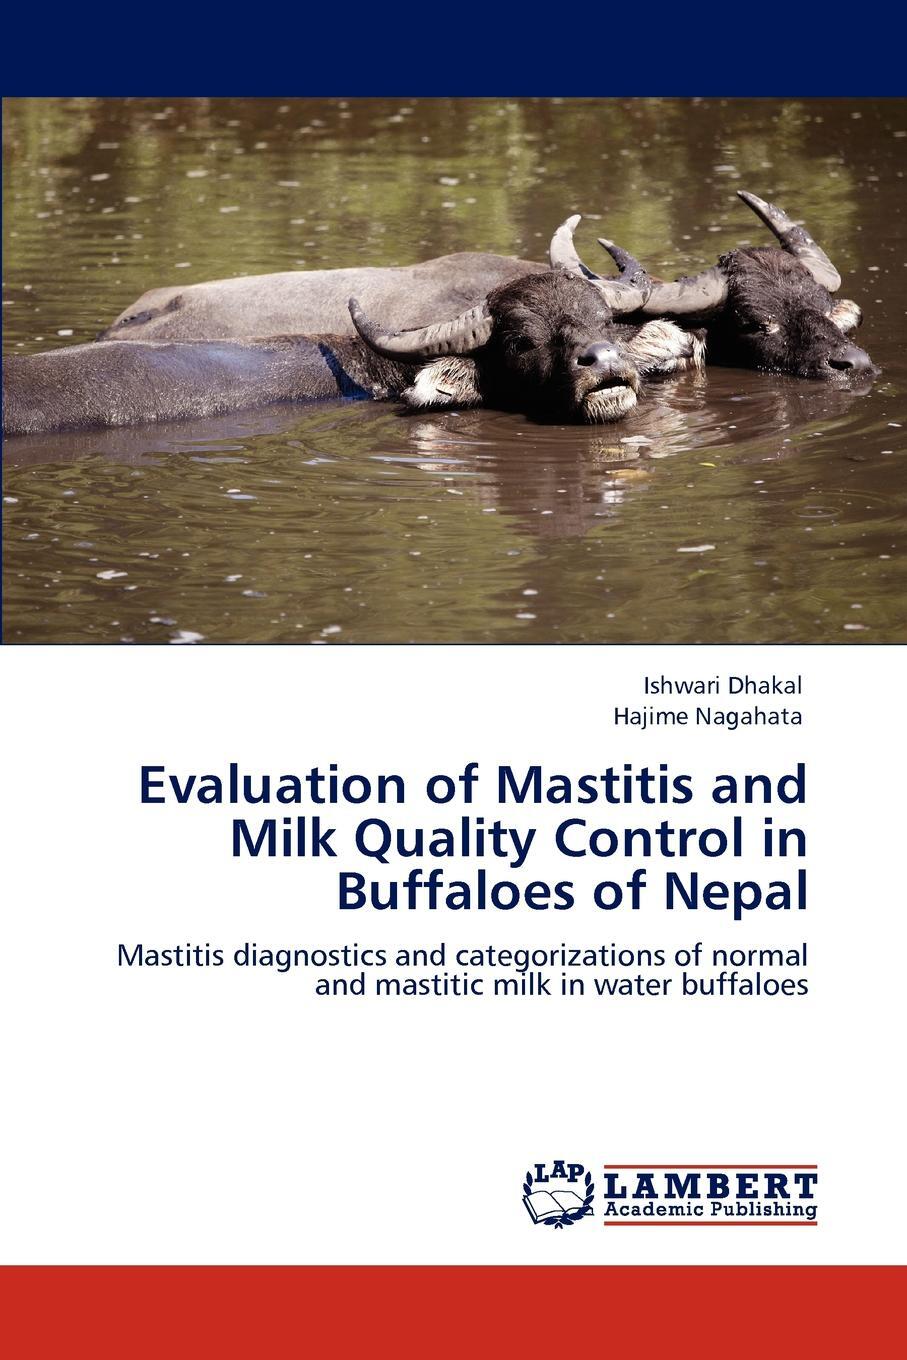 фото Evaluation of Mastitis and Milk Quality Control in Buffaloes of Nepal